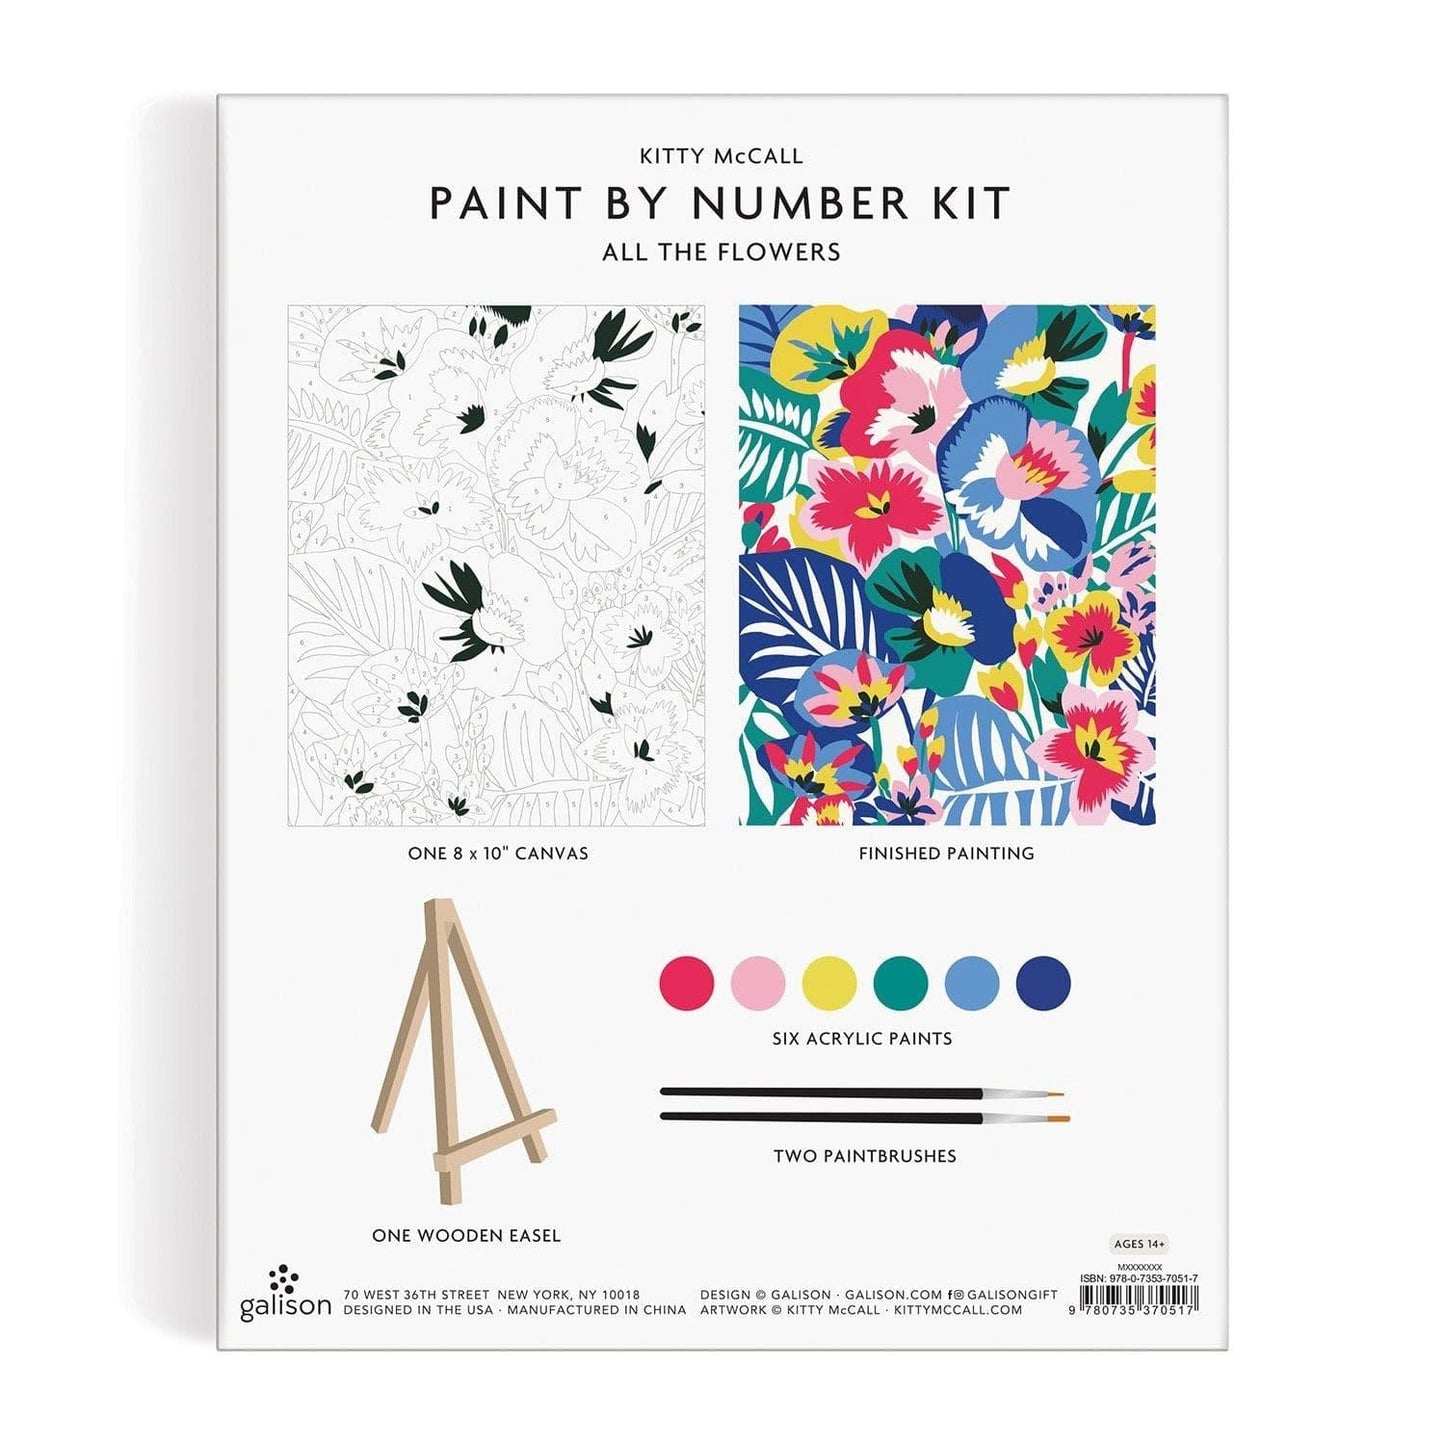 Kitty McCall All the Flowers Paint By Number Kit Kitty McCall All the Flowers Paint By Number Kit Kitty McCall All the Flowers Paint By Number Kit 